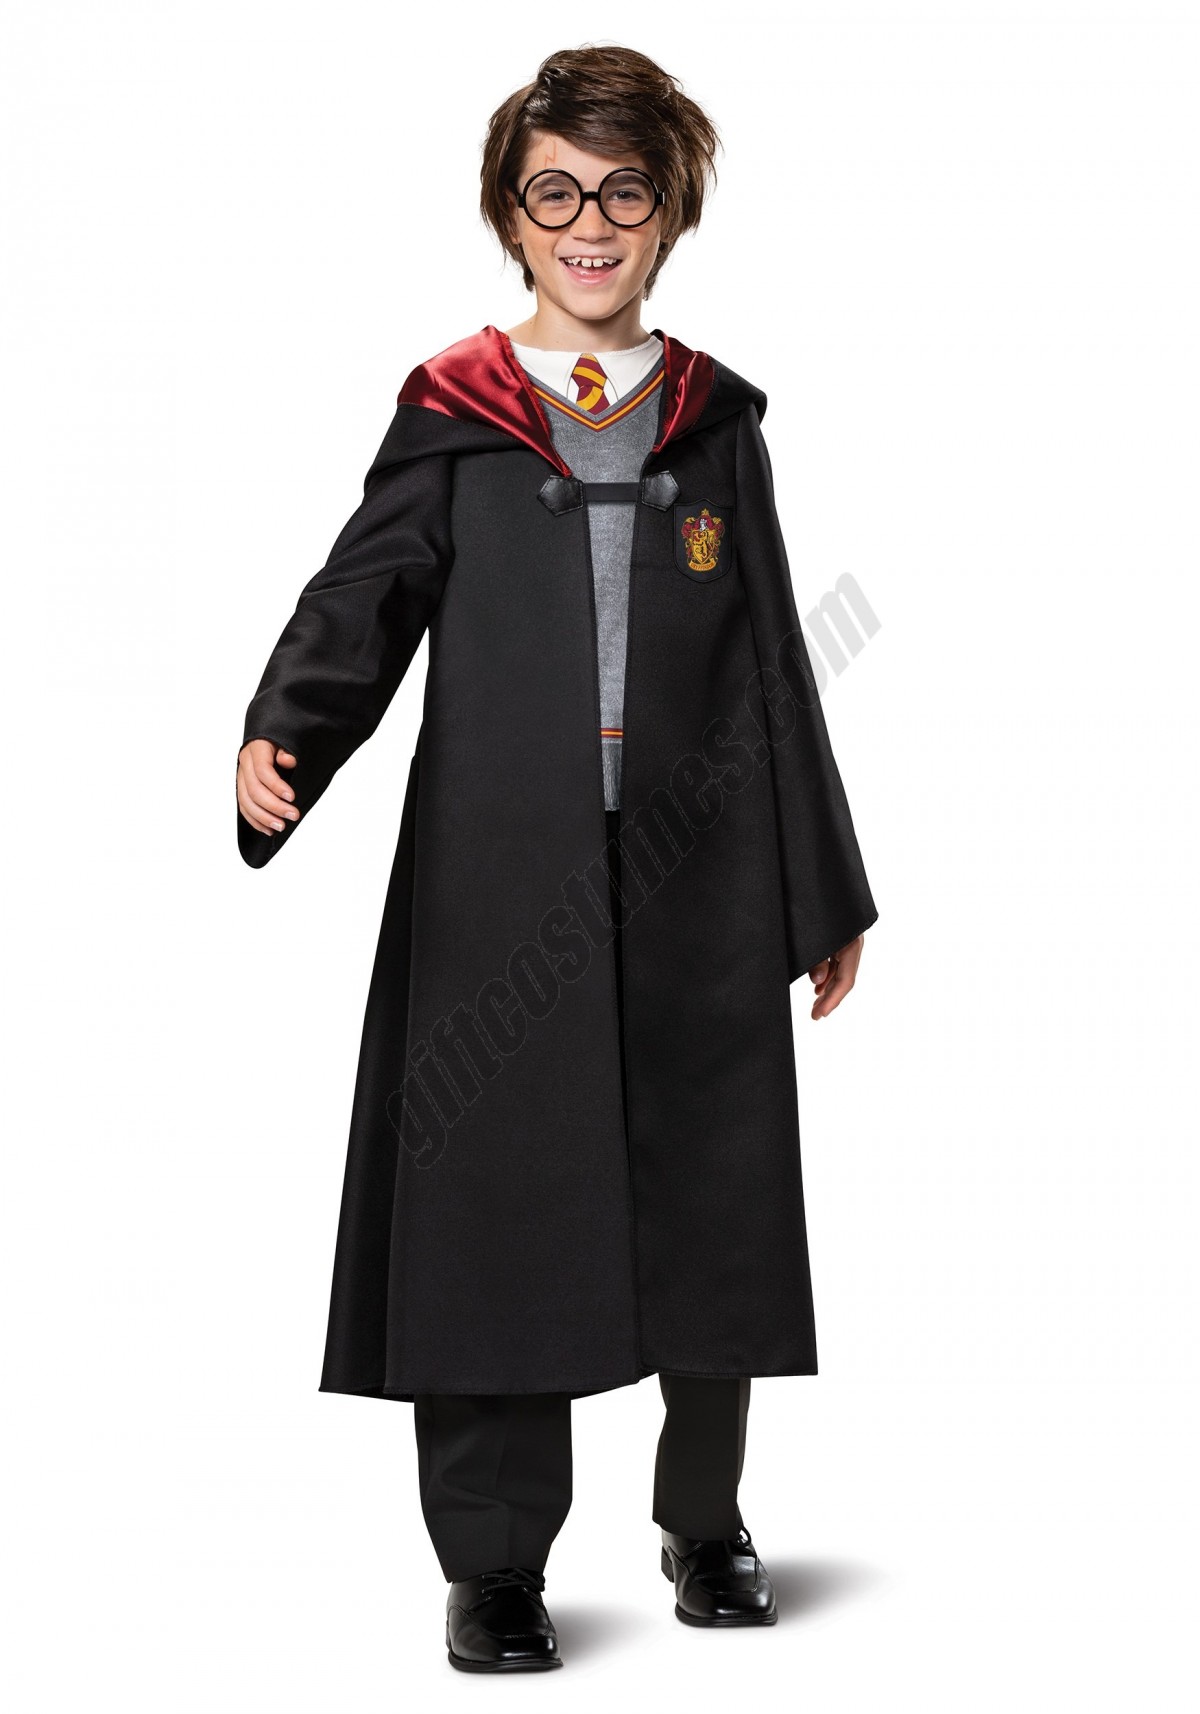 Boy's Harry Potter Classic Harry Costume Promotions - -0